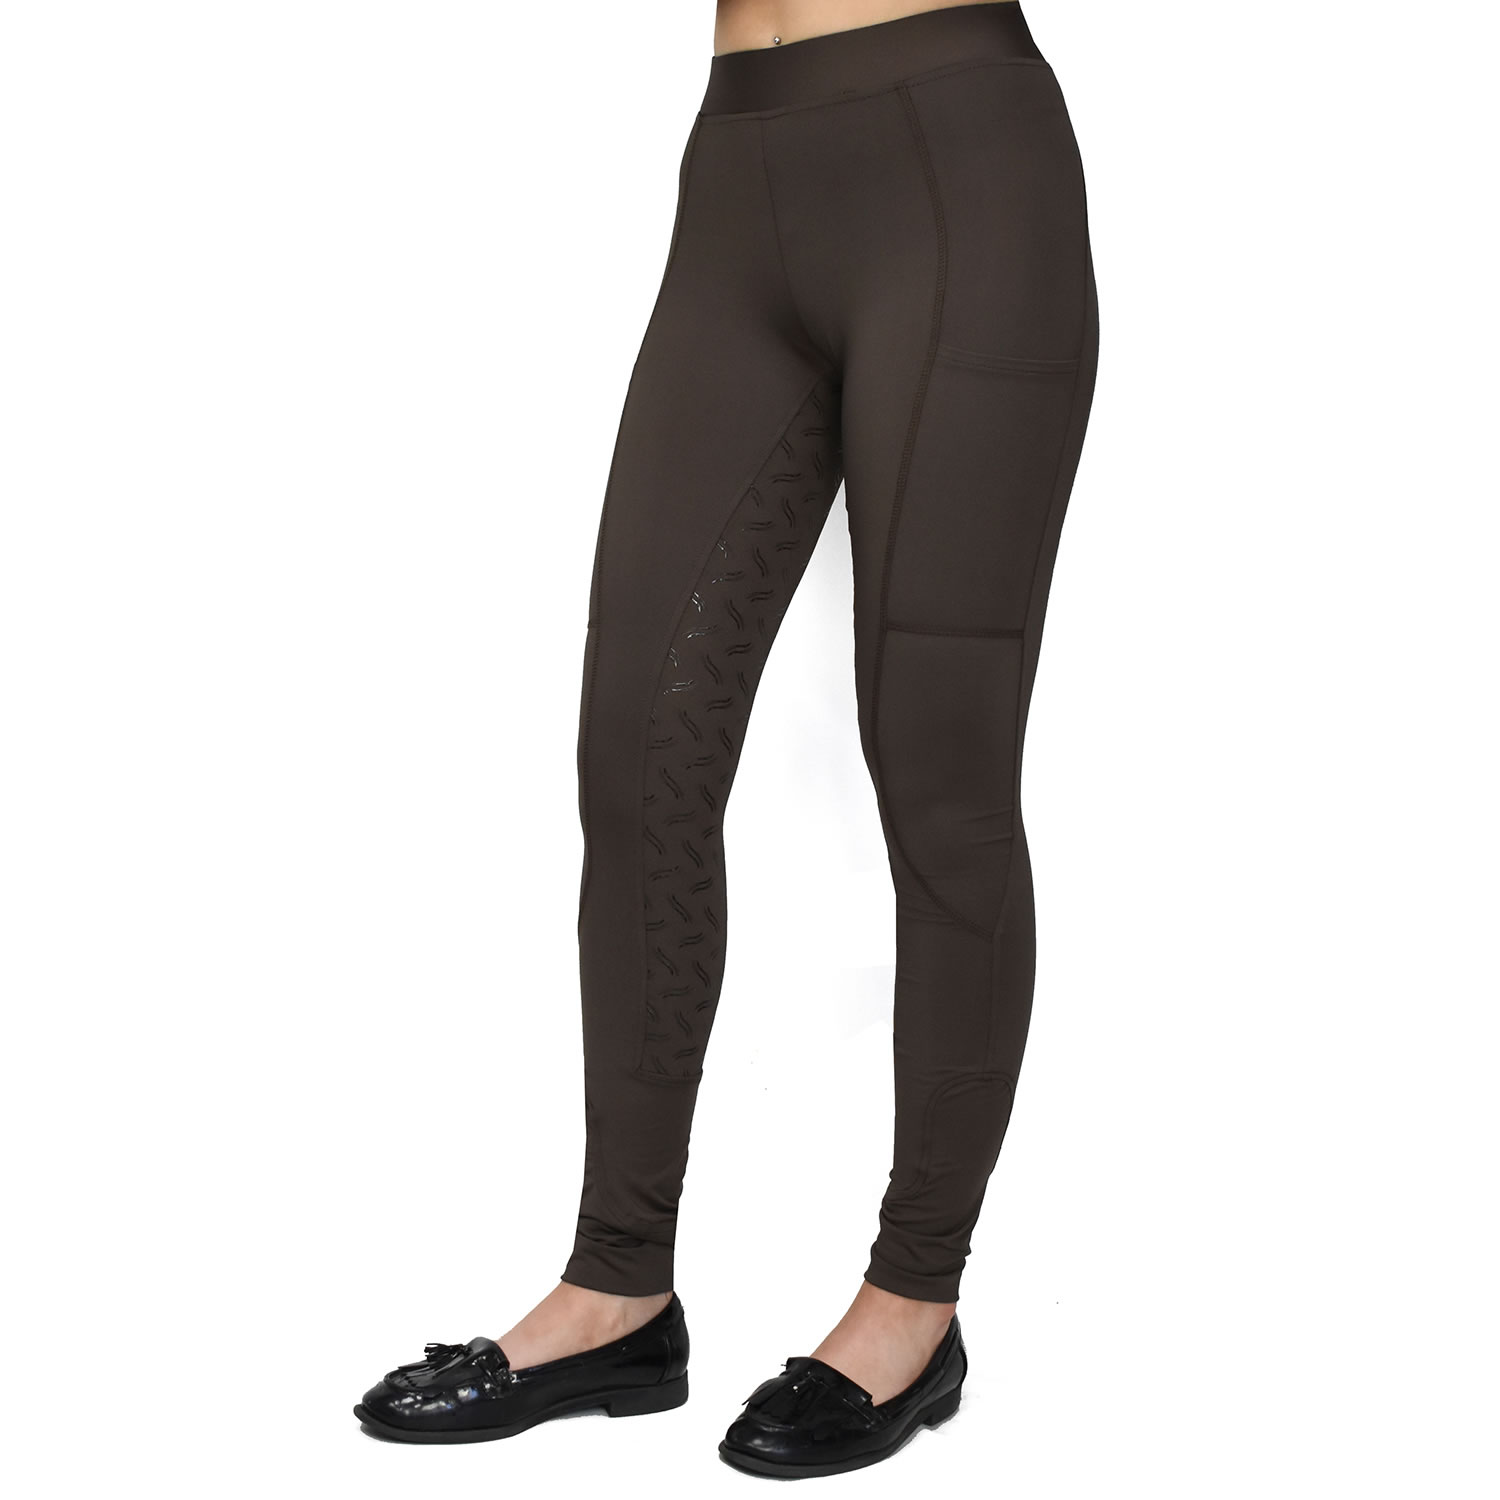 WHITAKER SHORE RIDING TIGHTS BROWN  SMALL LADIES